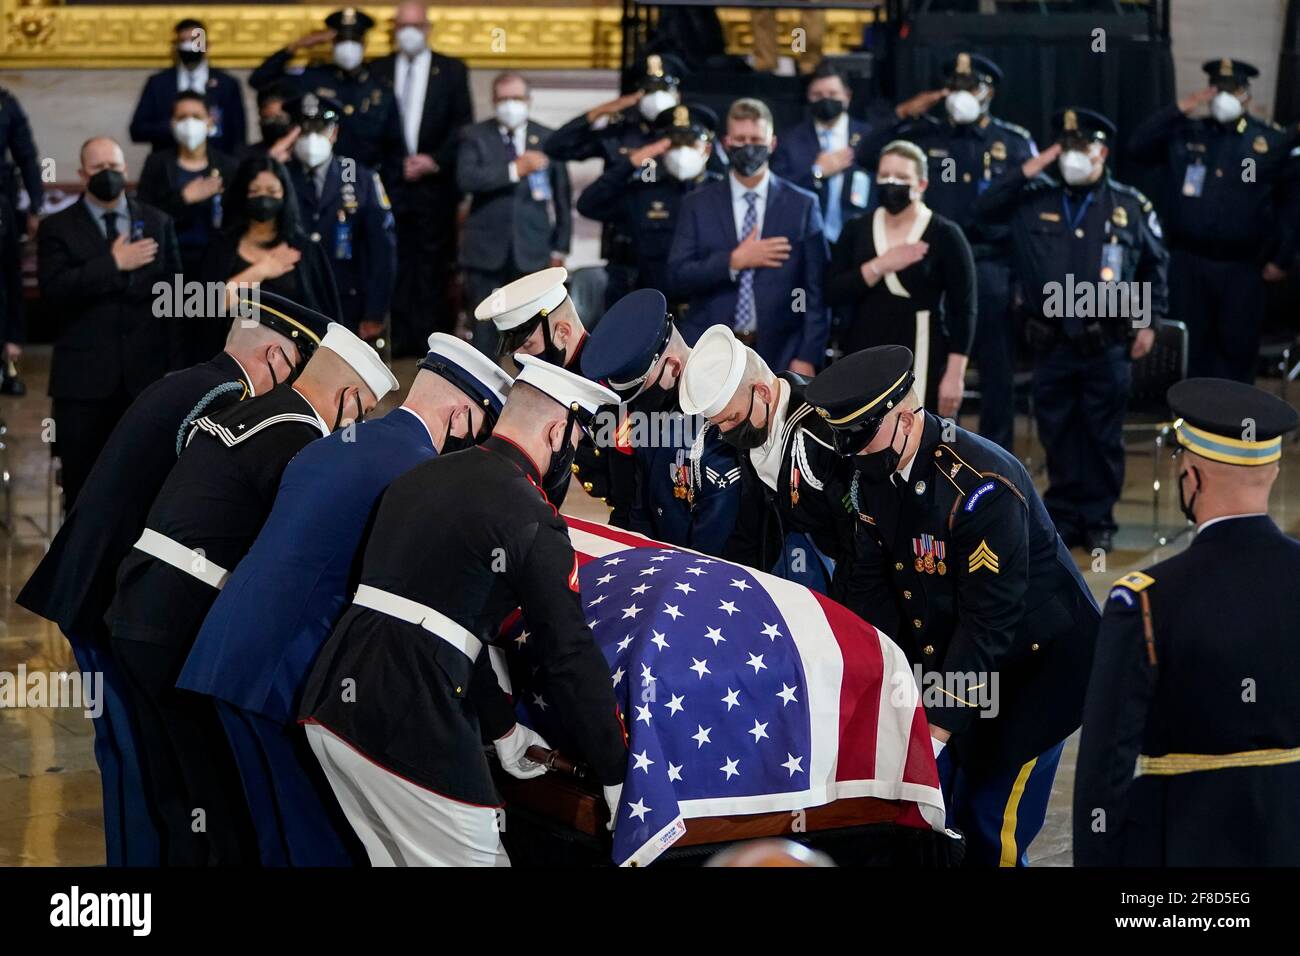 WASHINGTON, DC - APRIL 13: The remains of the late U.S. Capitol Police officer William 'Billy' Evans arrive for a memorial service as he lies in honor in the Rotunda at the U.S. Capitol on April 13, 2021 in Washington, DC. Officer Evans was killed in the line of duty during the attack outside the U.S. Capitol on April 2. He is the sixth Capitol Police officer to die in the line of duty in the nearly 200 years since the force was created. Credit: Drew Angerer/Pool via CNP | usage worldwide Stock Photo